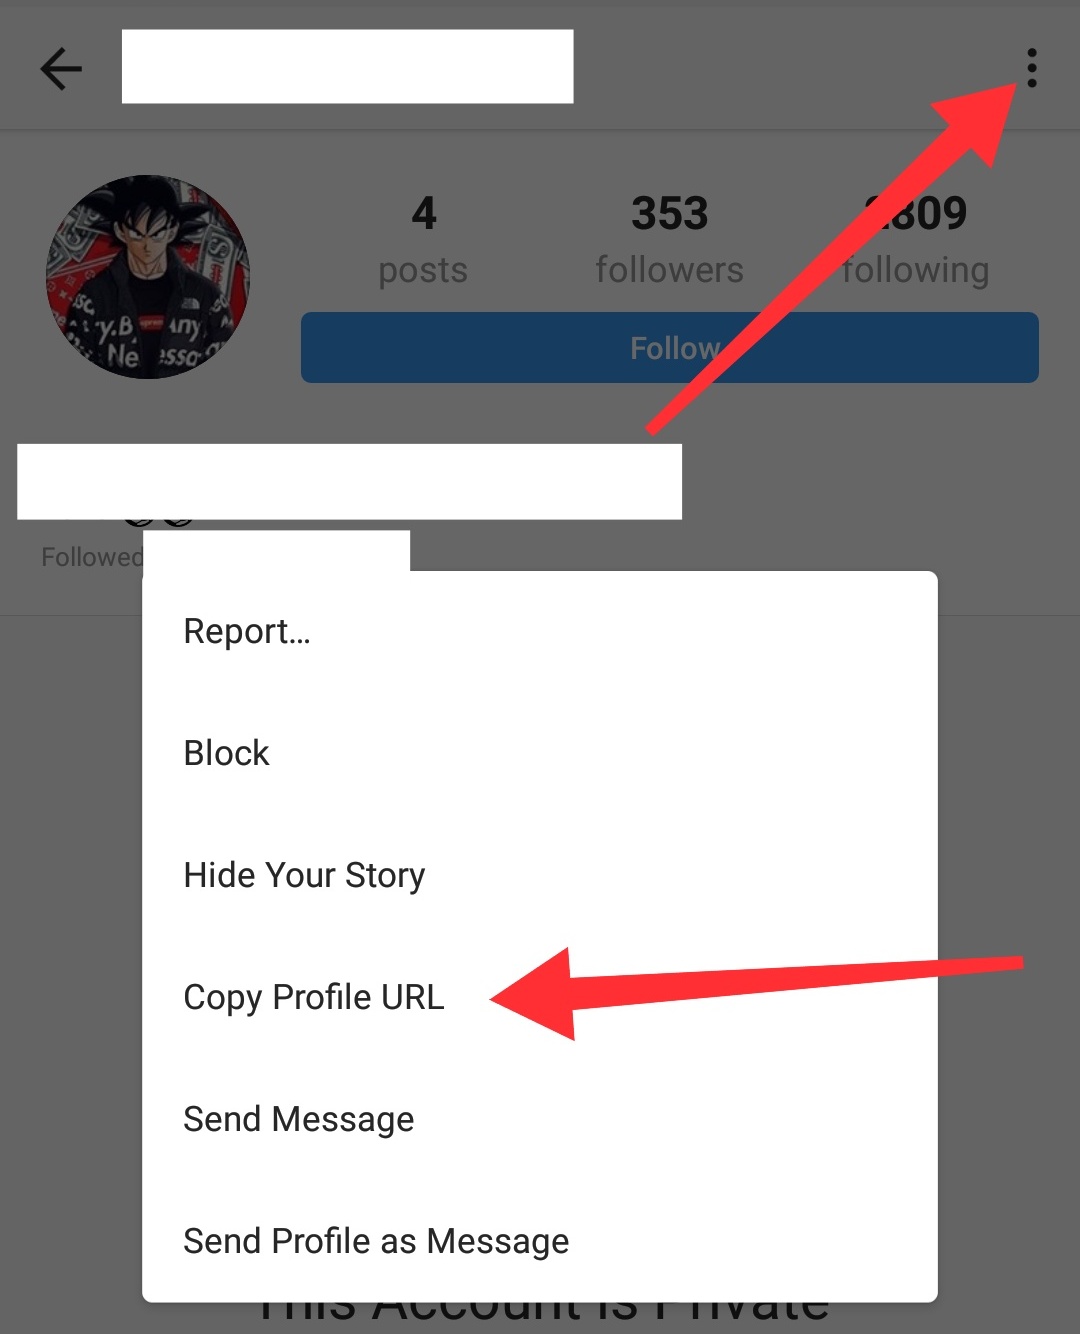 instagram private profile viewer tool